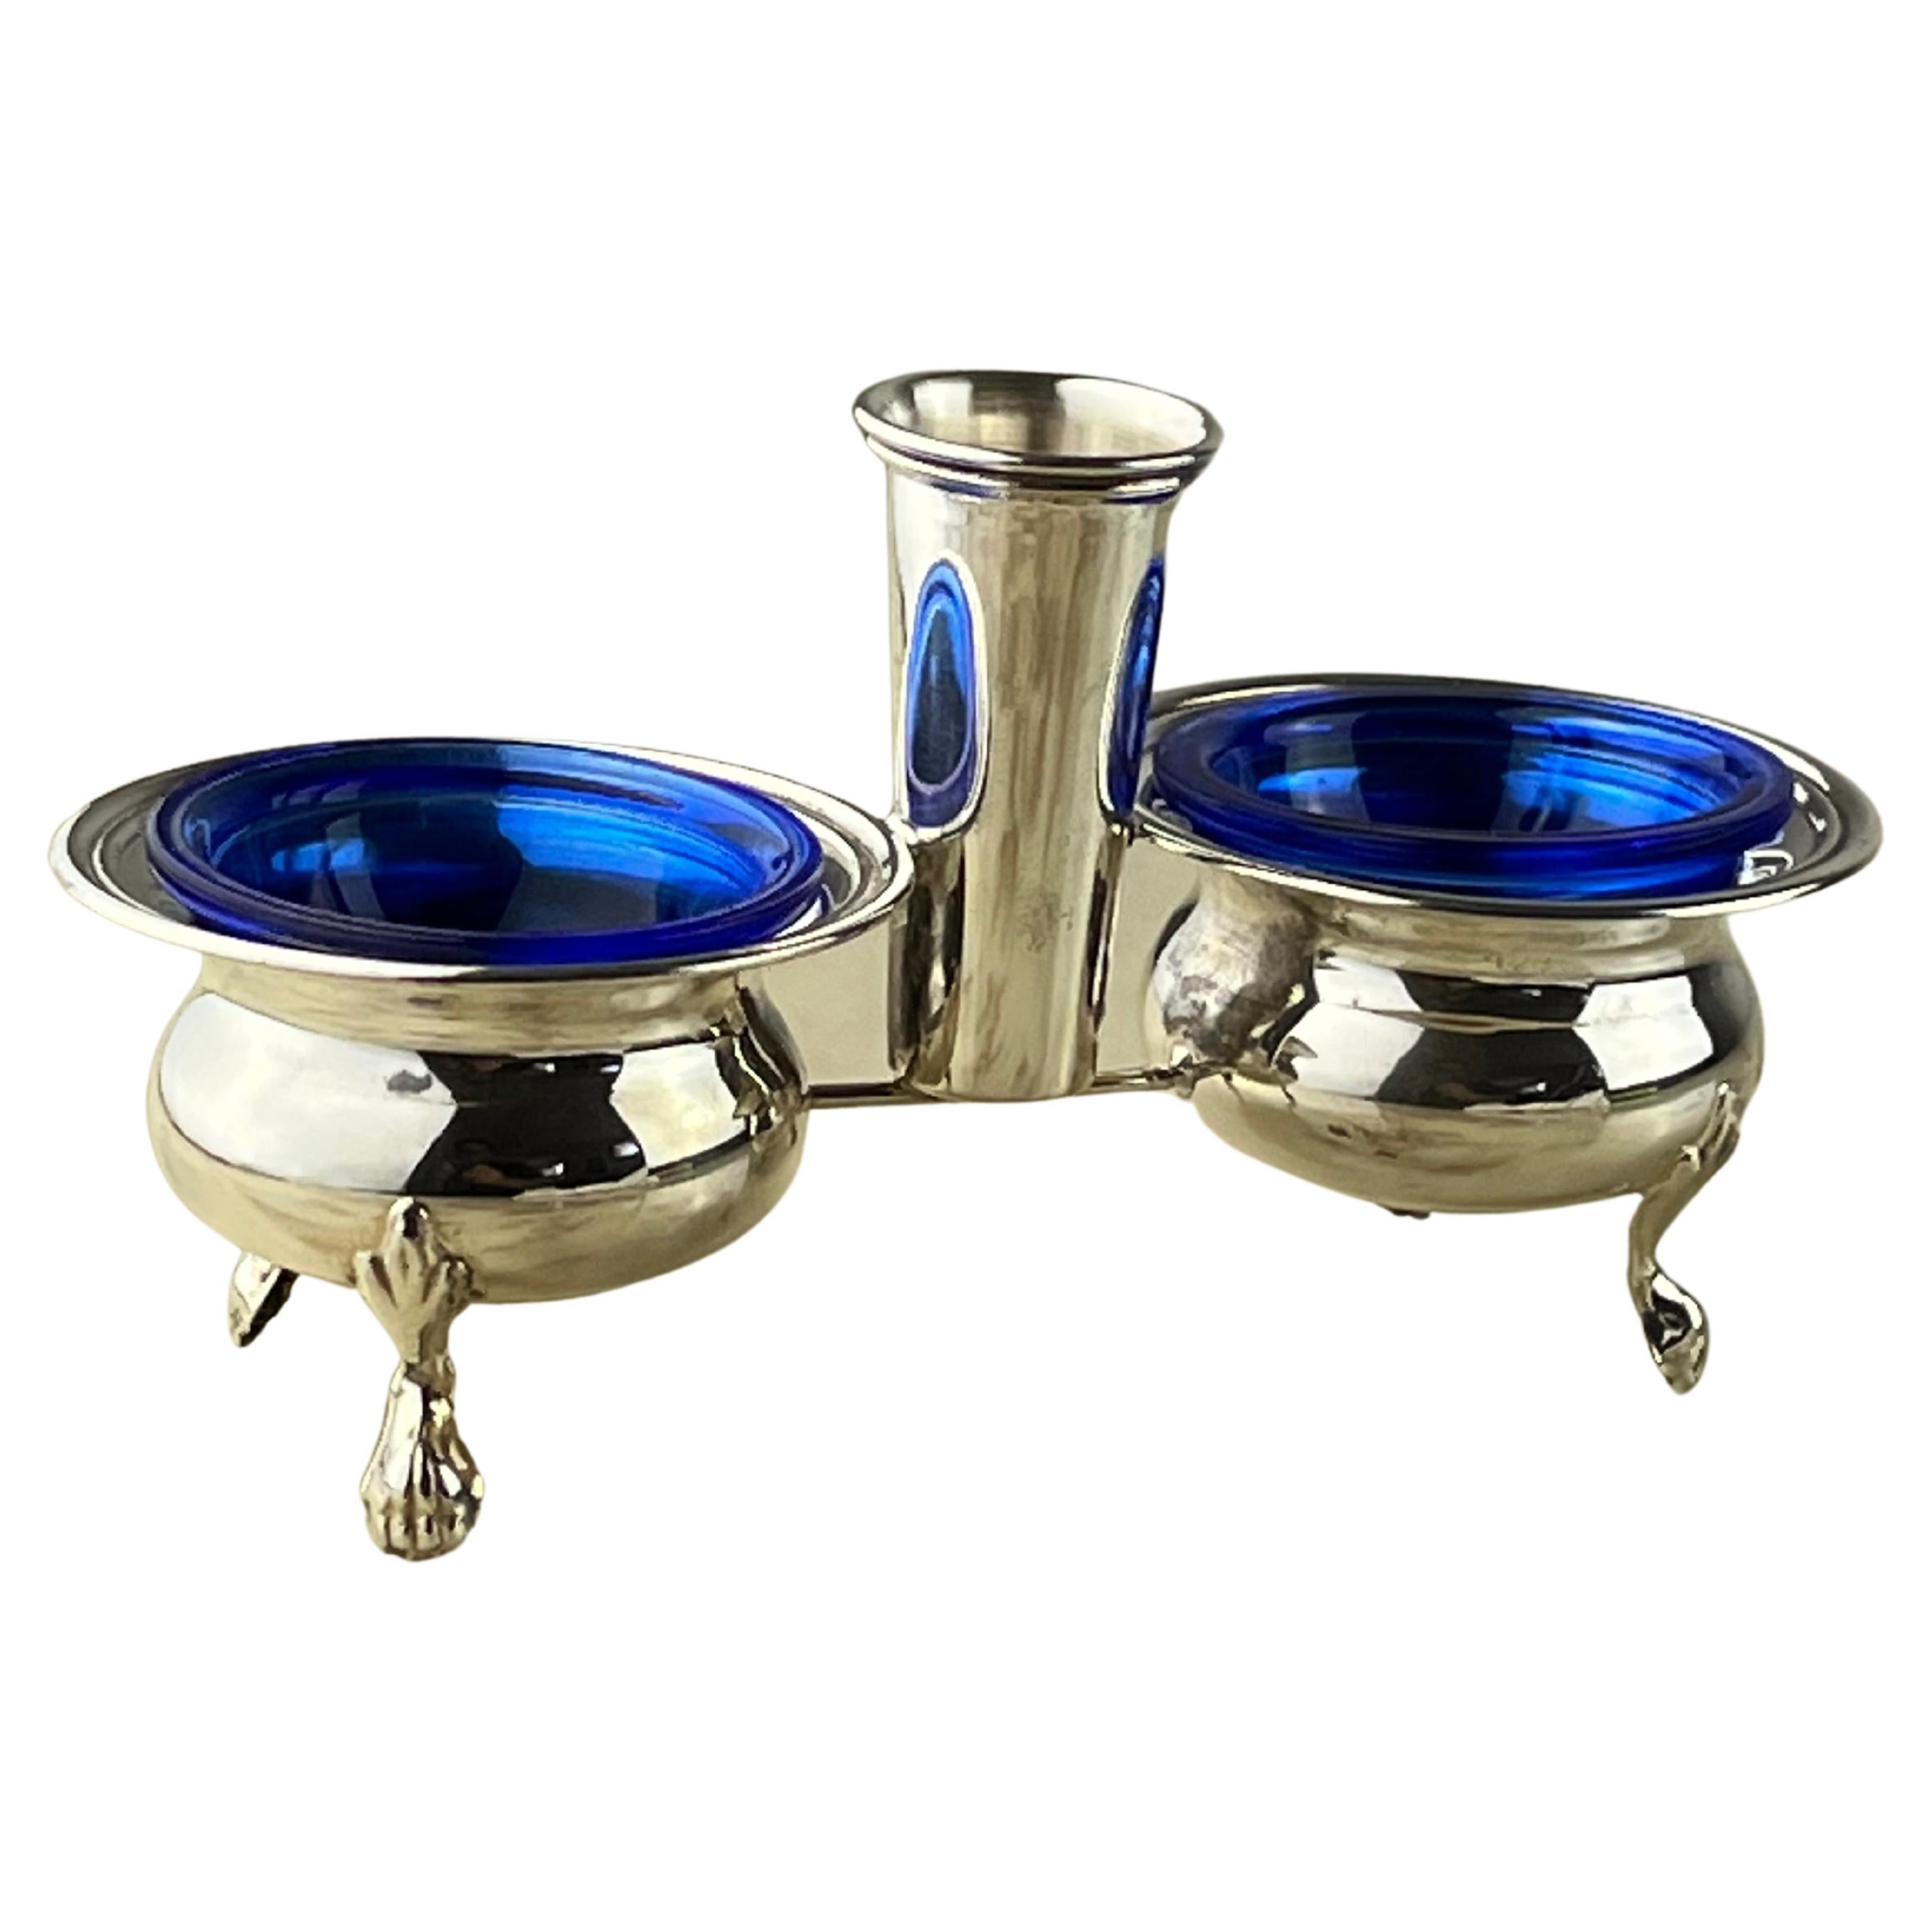 Salt/Pepper/Toothpick Set in 800 Silver and Crystal, Italy, 1990